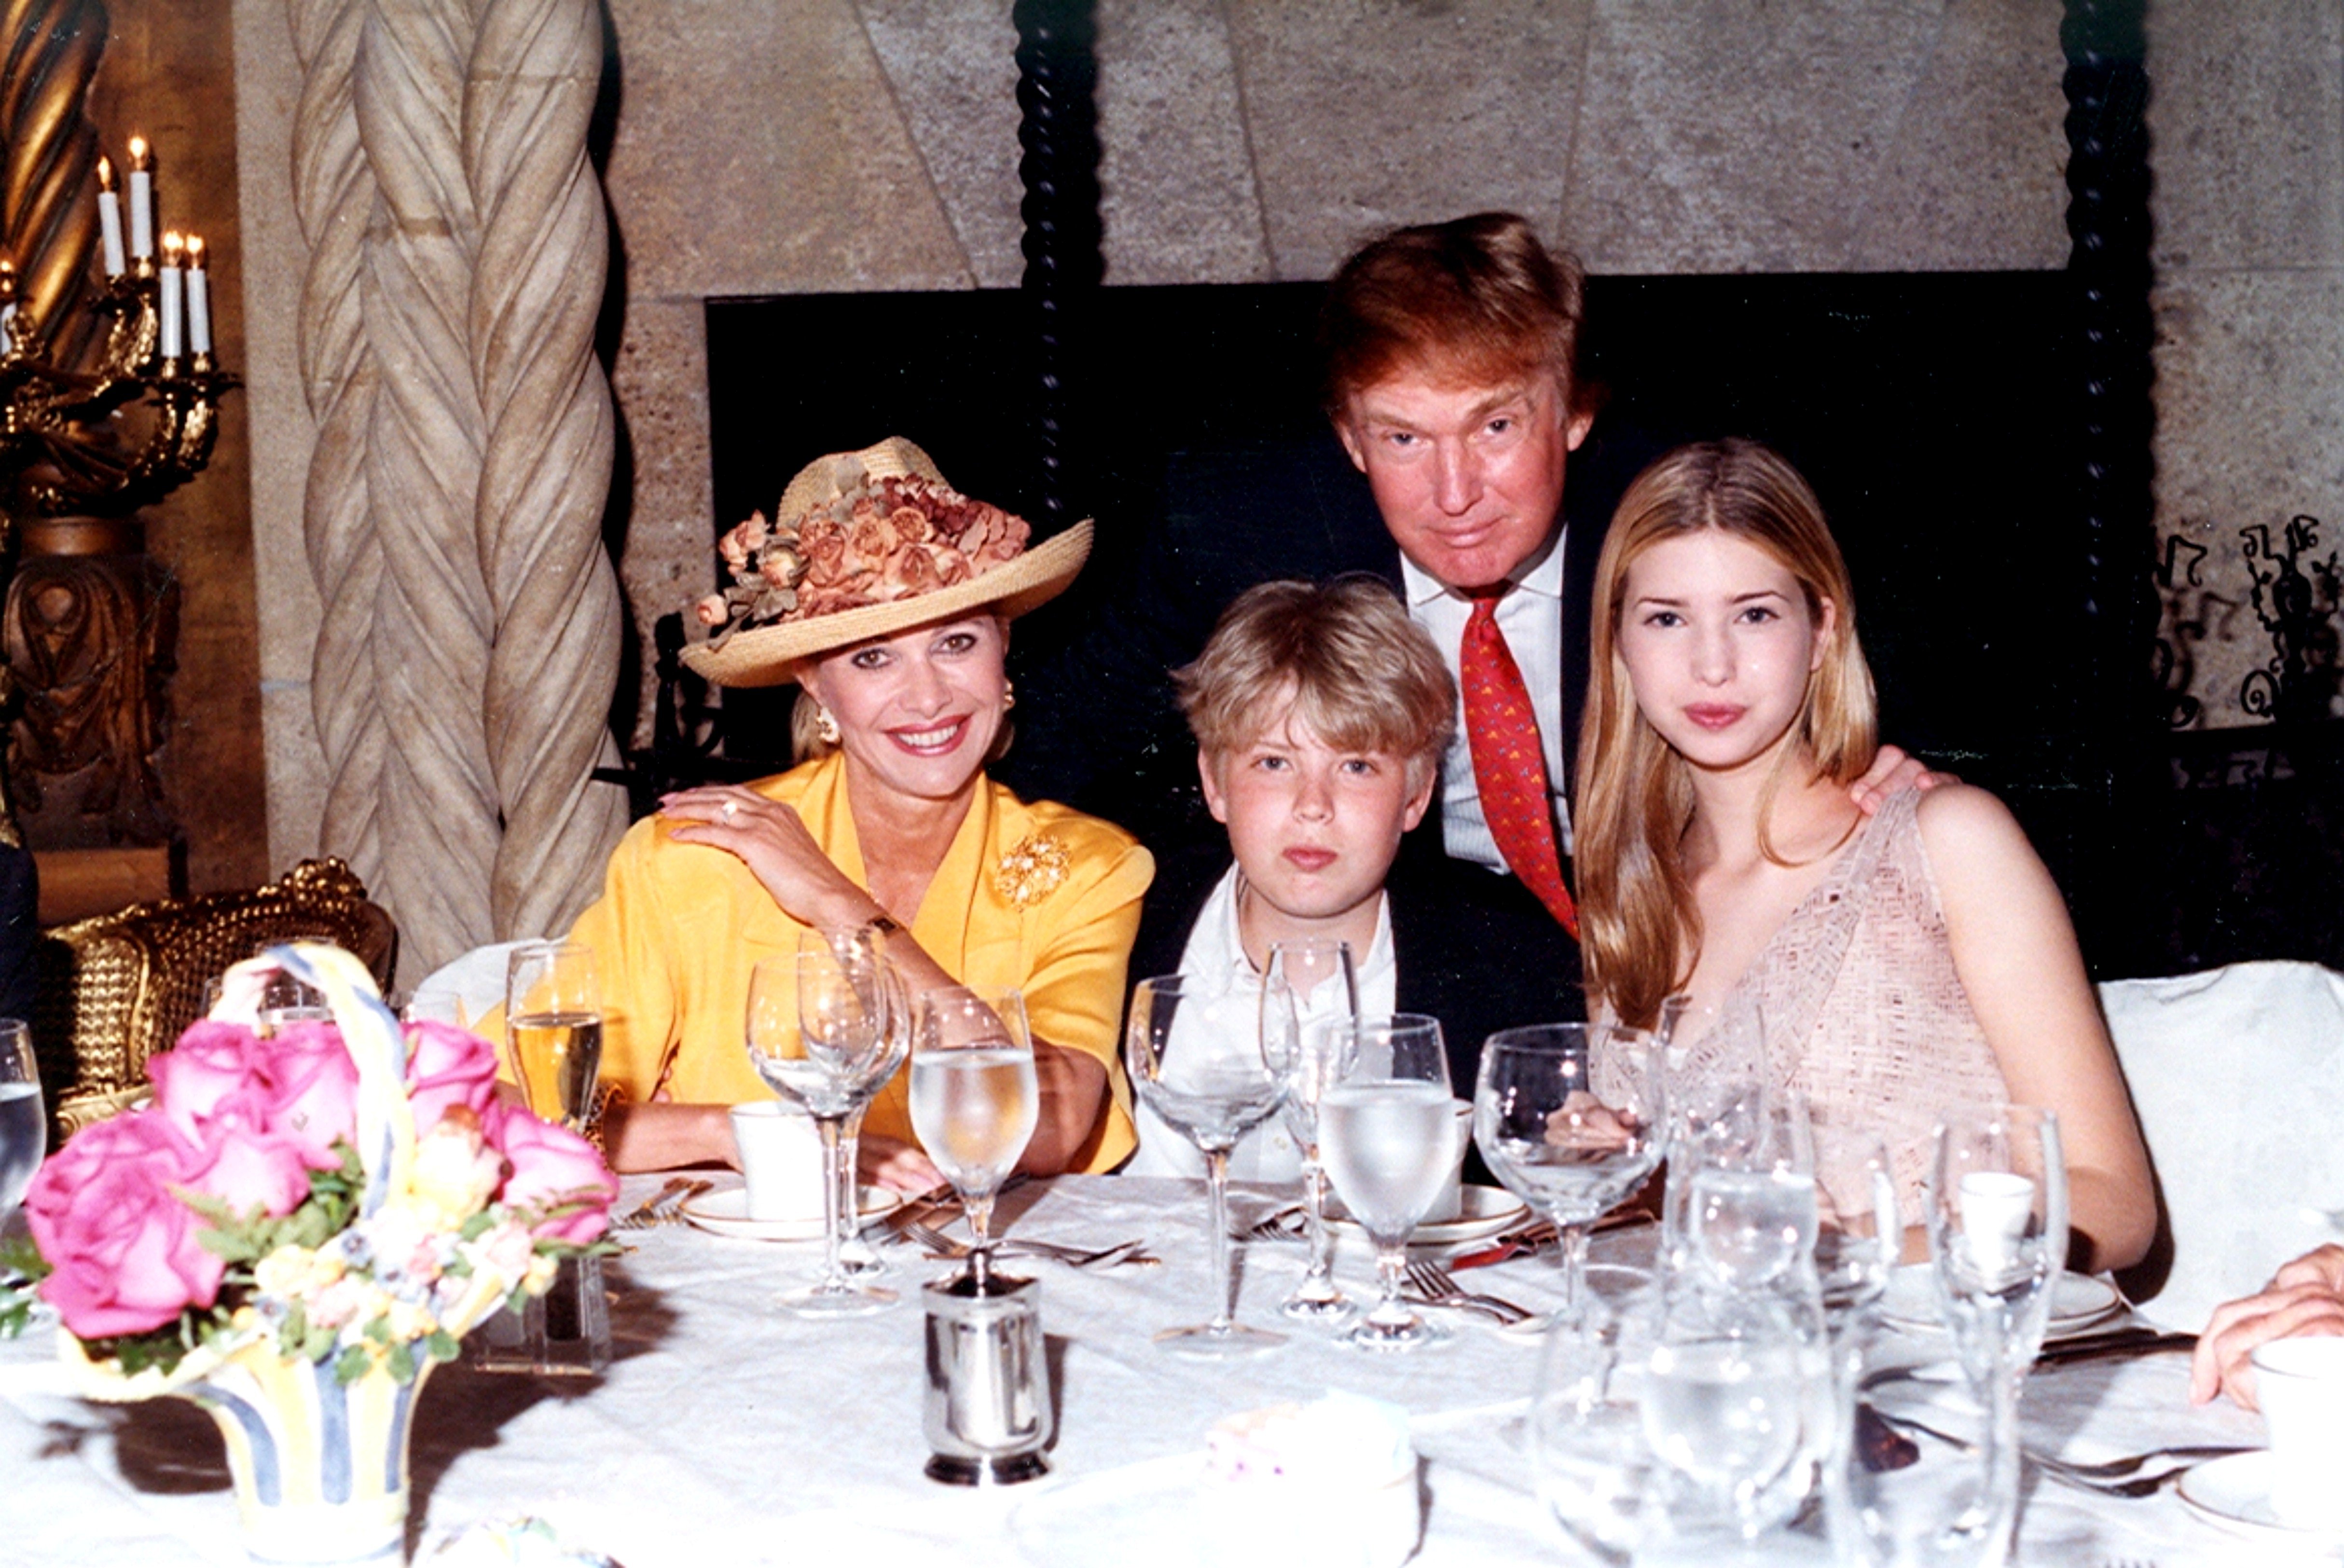 Family portrait of socialite Ivana Trump, her son Eric Trump, her former husband, businessman Donald Trump, and her daughter Ivanka Trump seated at a table at Mar-a-Lago Estate, Palm Beach , Florida, 1998. |  Source: Getty Images